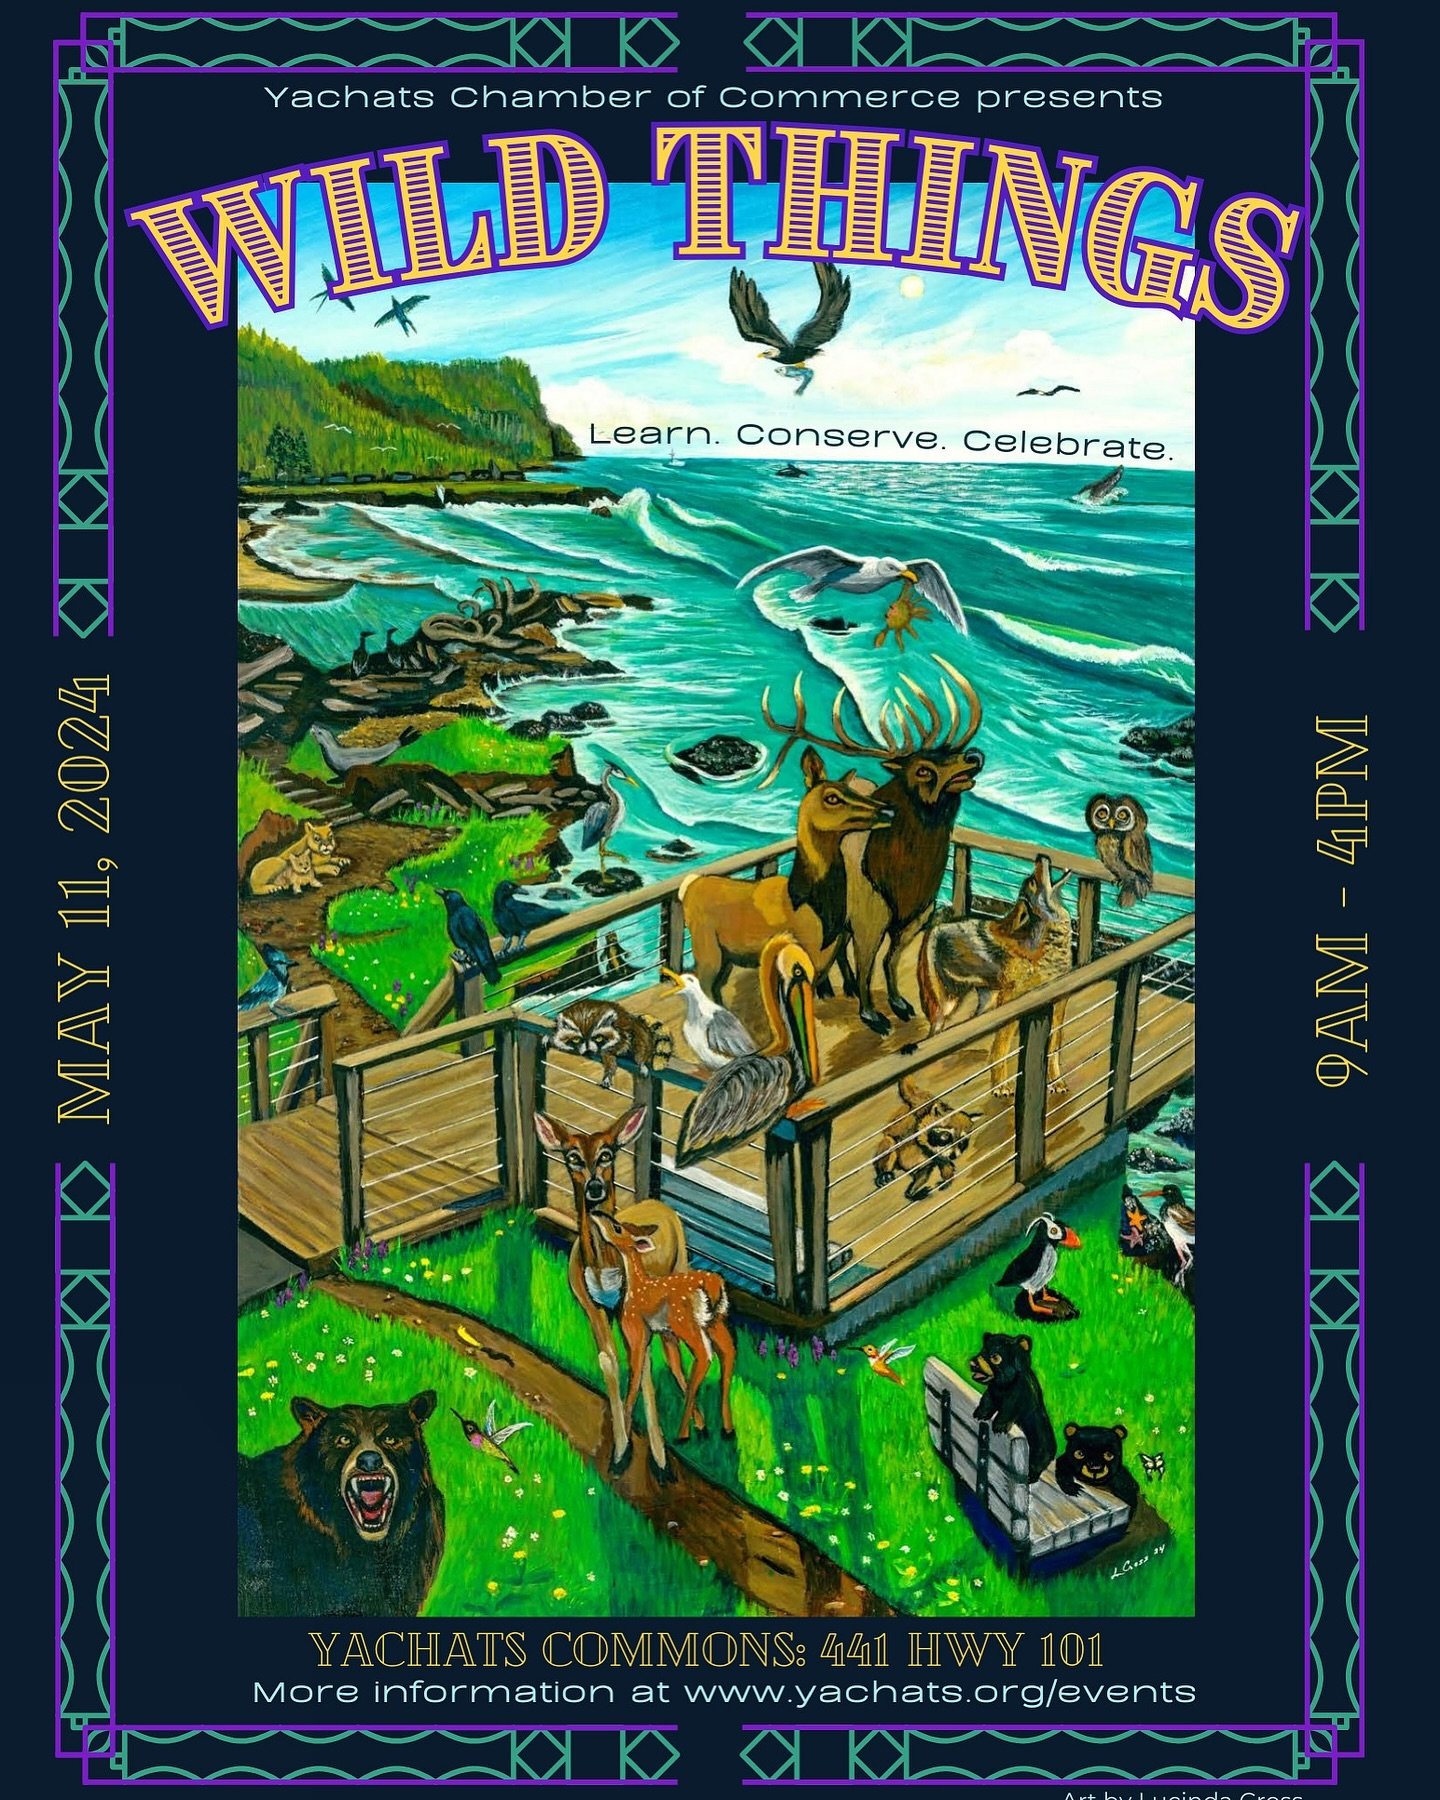 Headed to Yachats the weekend of May 11th? Join in the Wild Things and spend a day enjoying what is at the heart of Yachats! Conservation education and whimsy fun! 
Www.yachats.org/events/wild-things for more info!